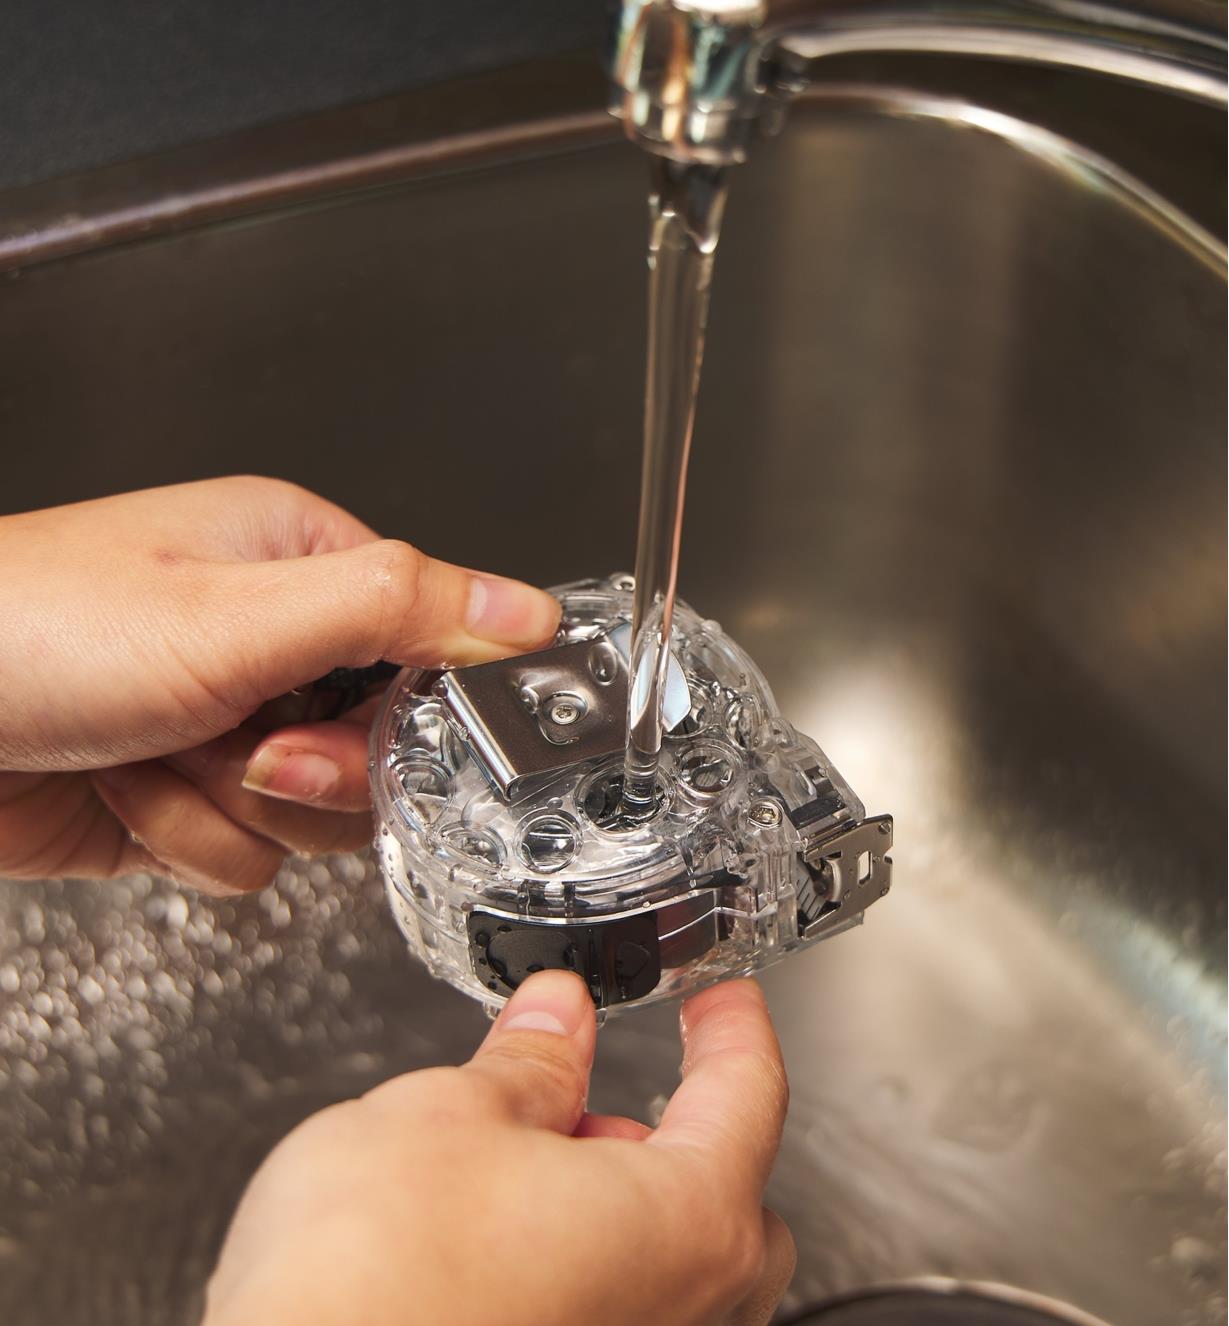 Rinsing a washable tape measure clean under a faucet